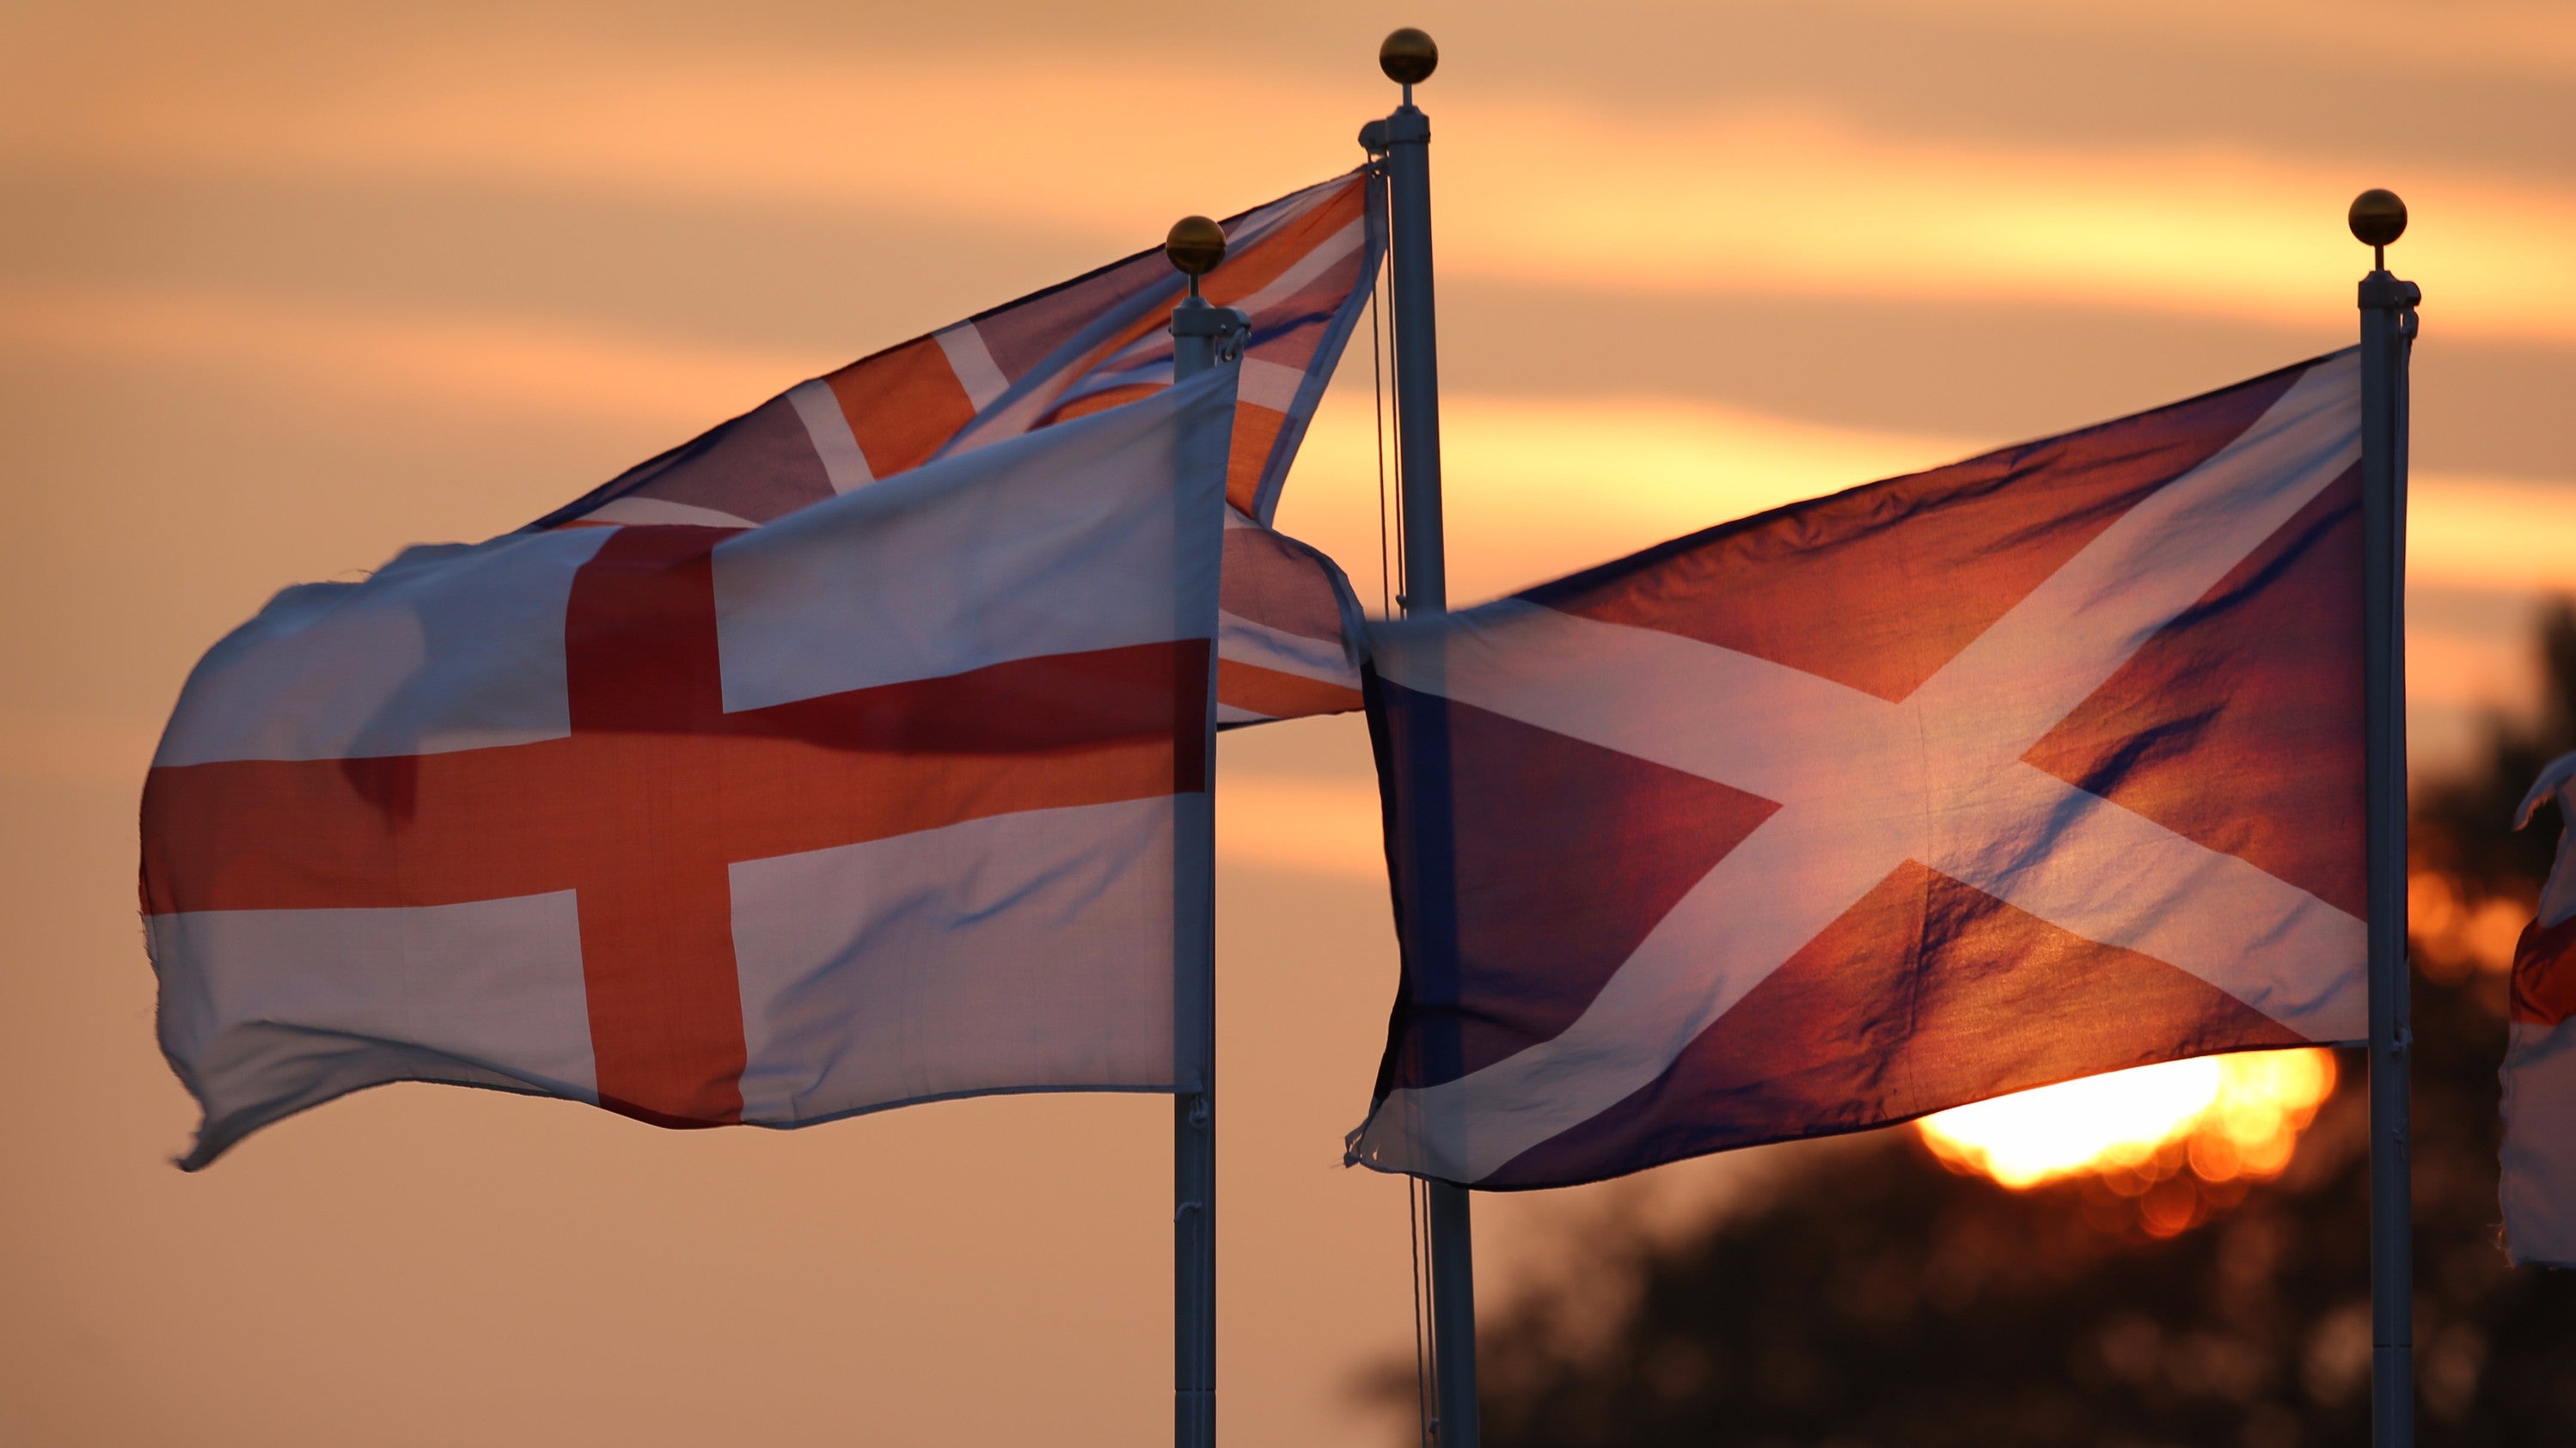 British flags fly at sunset